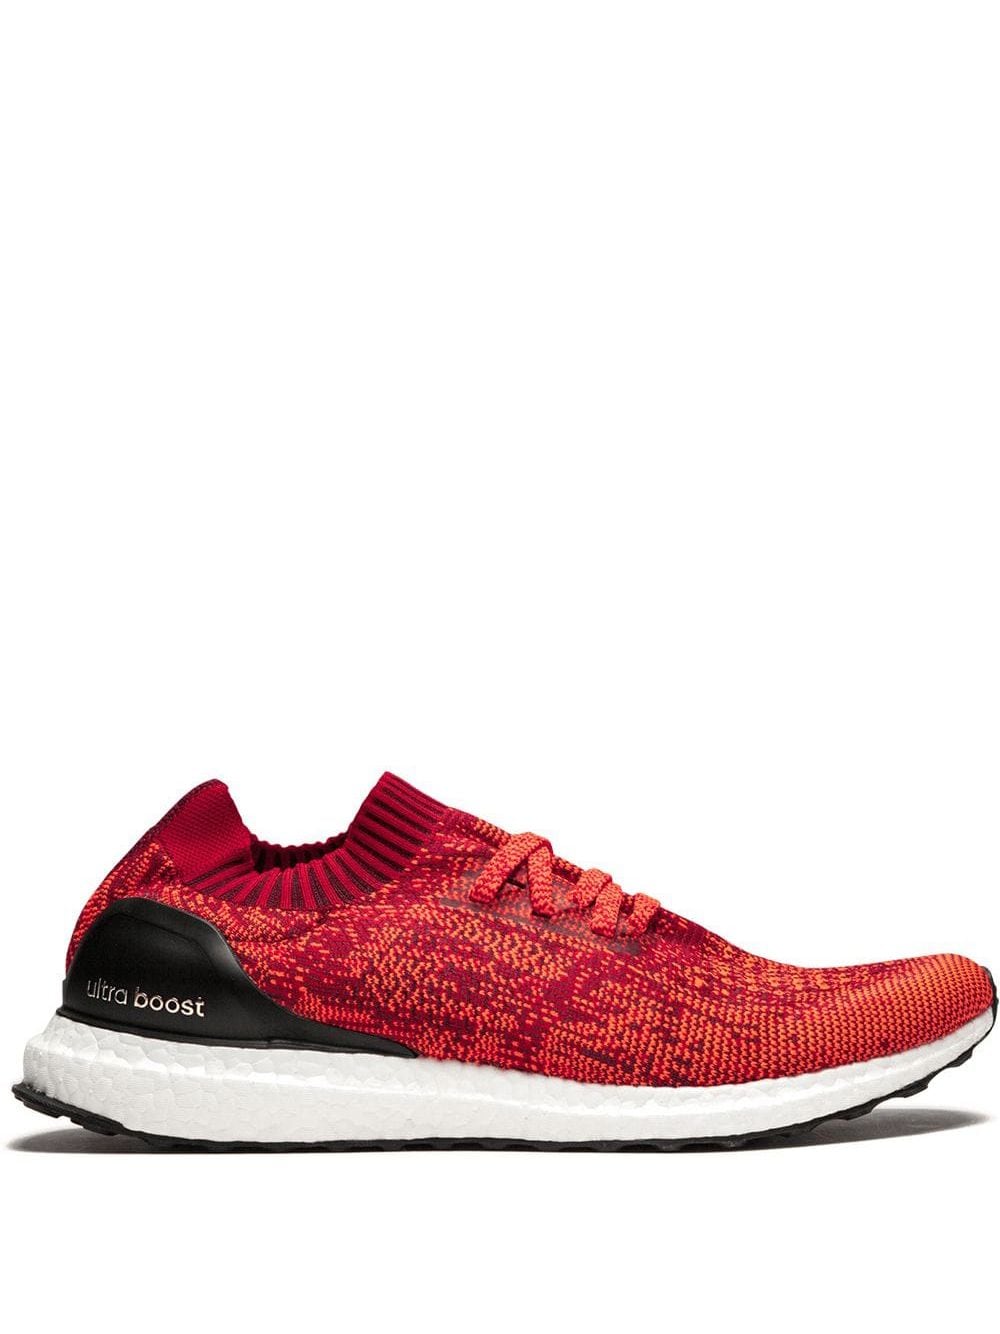 adidas Ultraboost Uncaged sneakers - Red von adidas